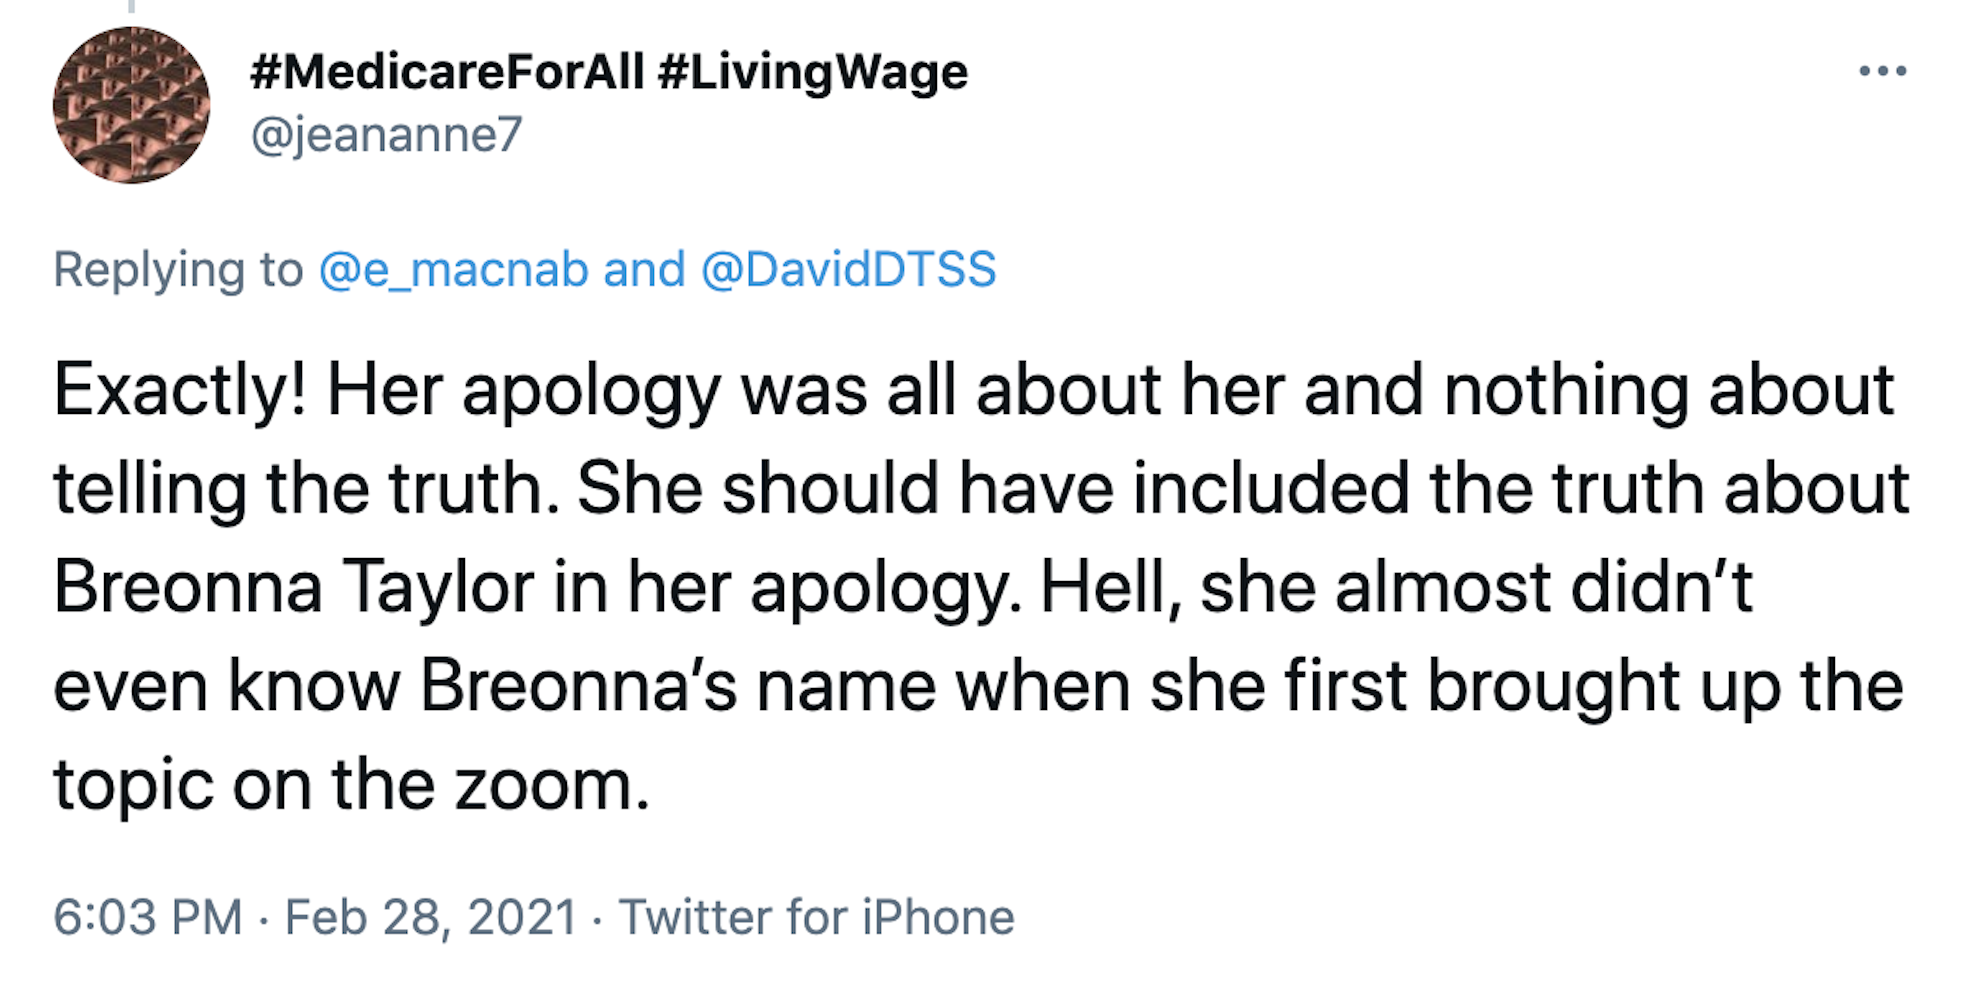 Exactly! Her apology was all about her and nothing about telling the truth. She should have included the truth about Breonna Taylor in her apology. Hell, she almost didn’t even know Breonna’s name when she first brought up the topic on the zoom.